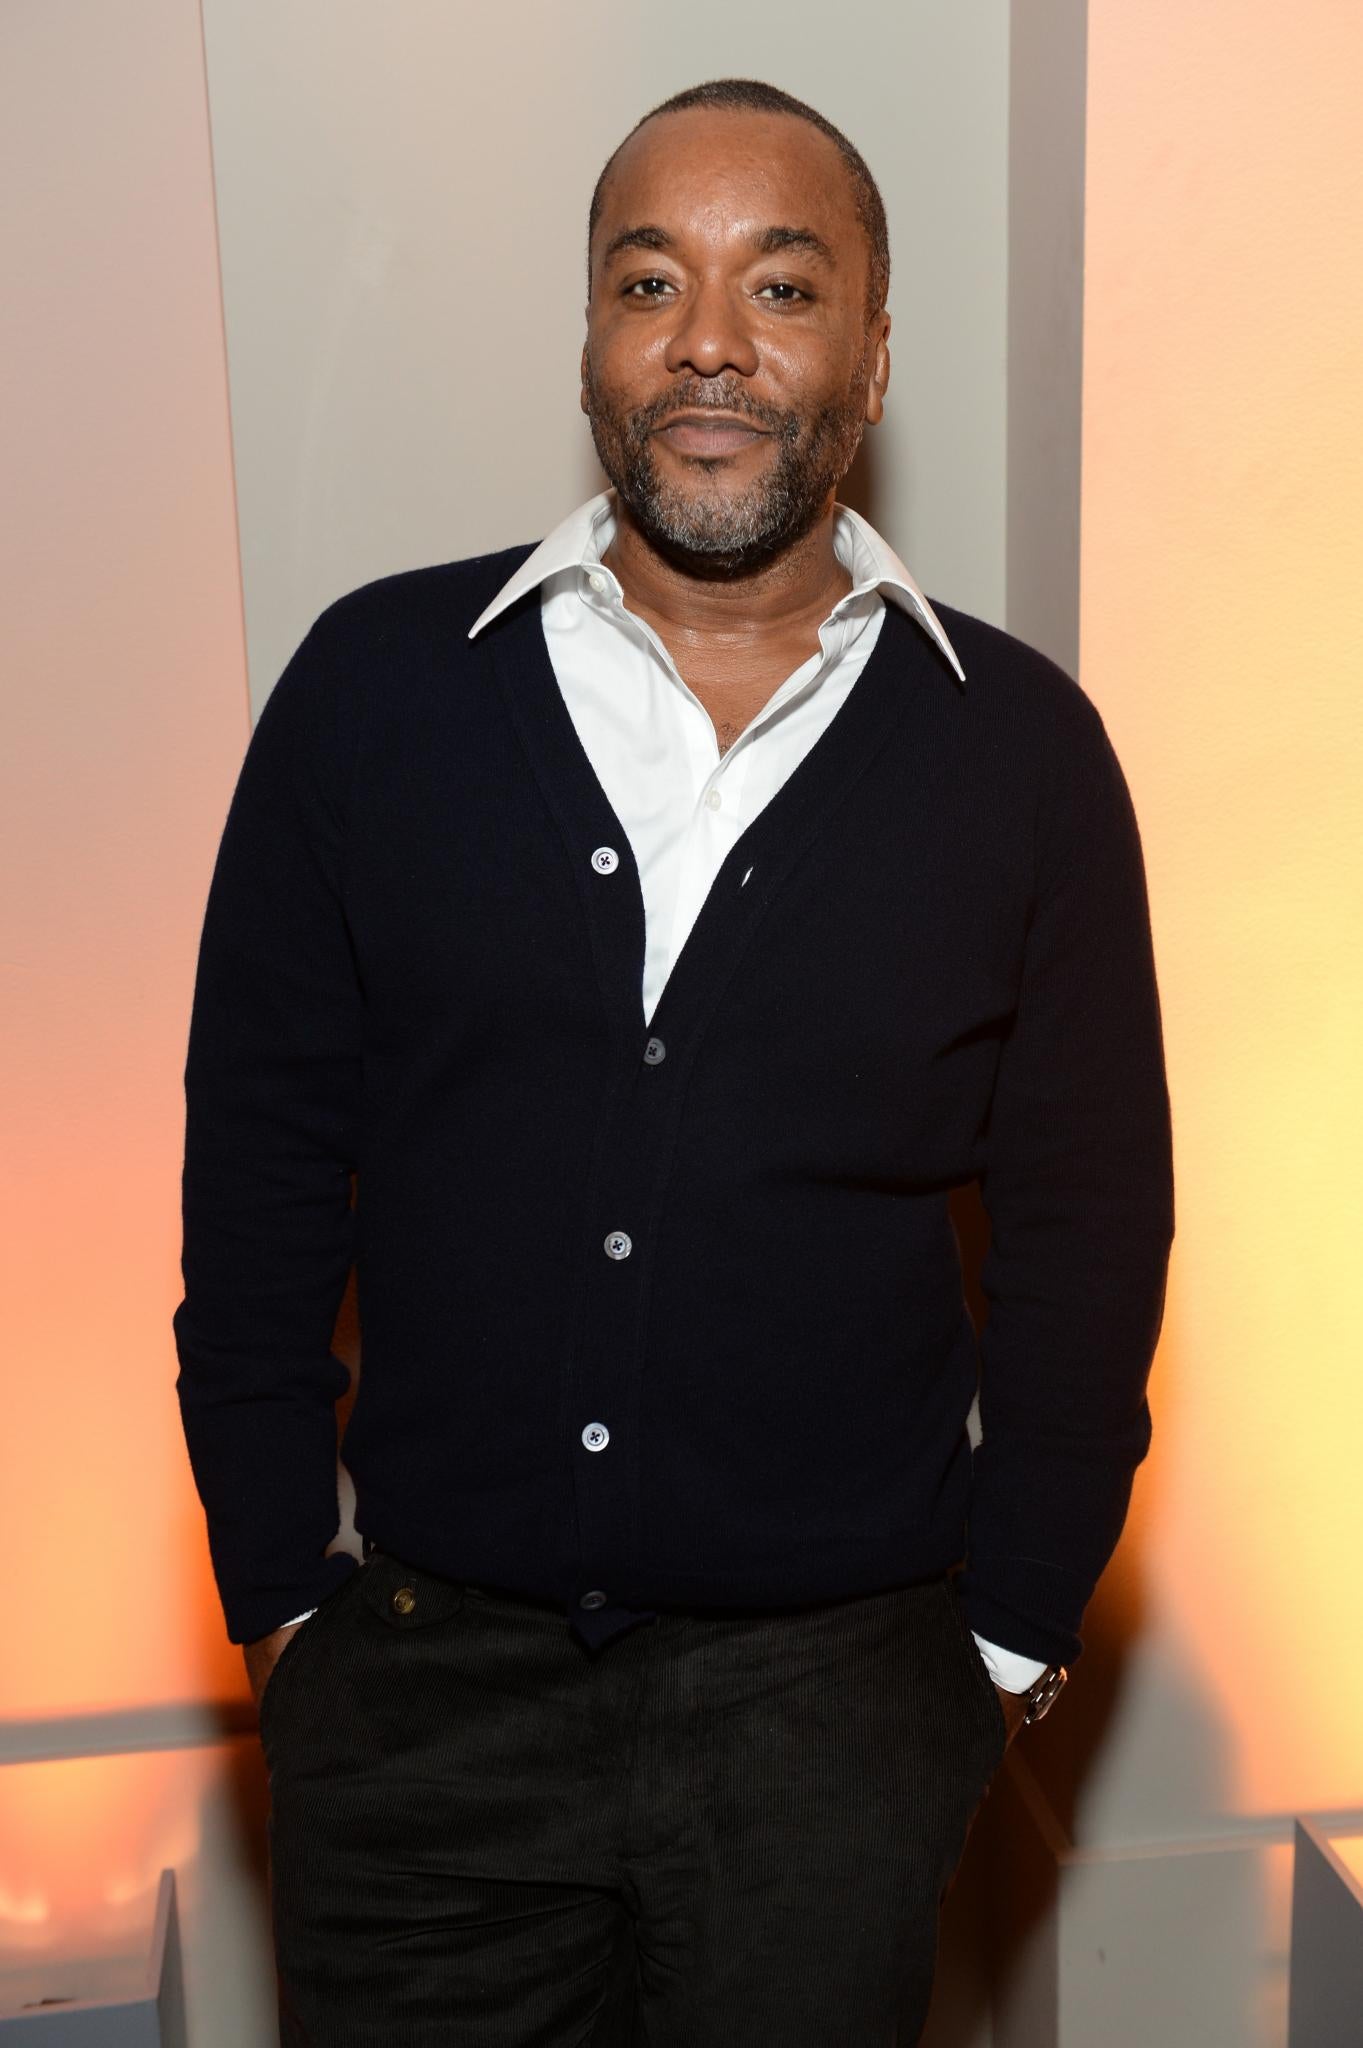 Lee Daniels Talks 'Empire' Growing Pains and Launching New Girl Group TV Show, 'Star'
